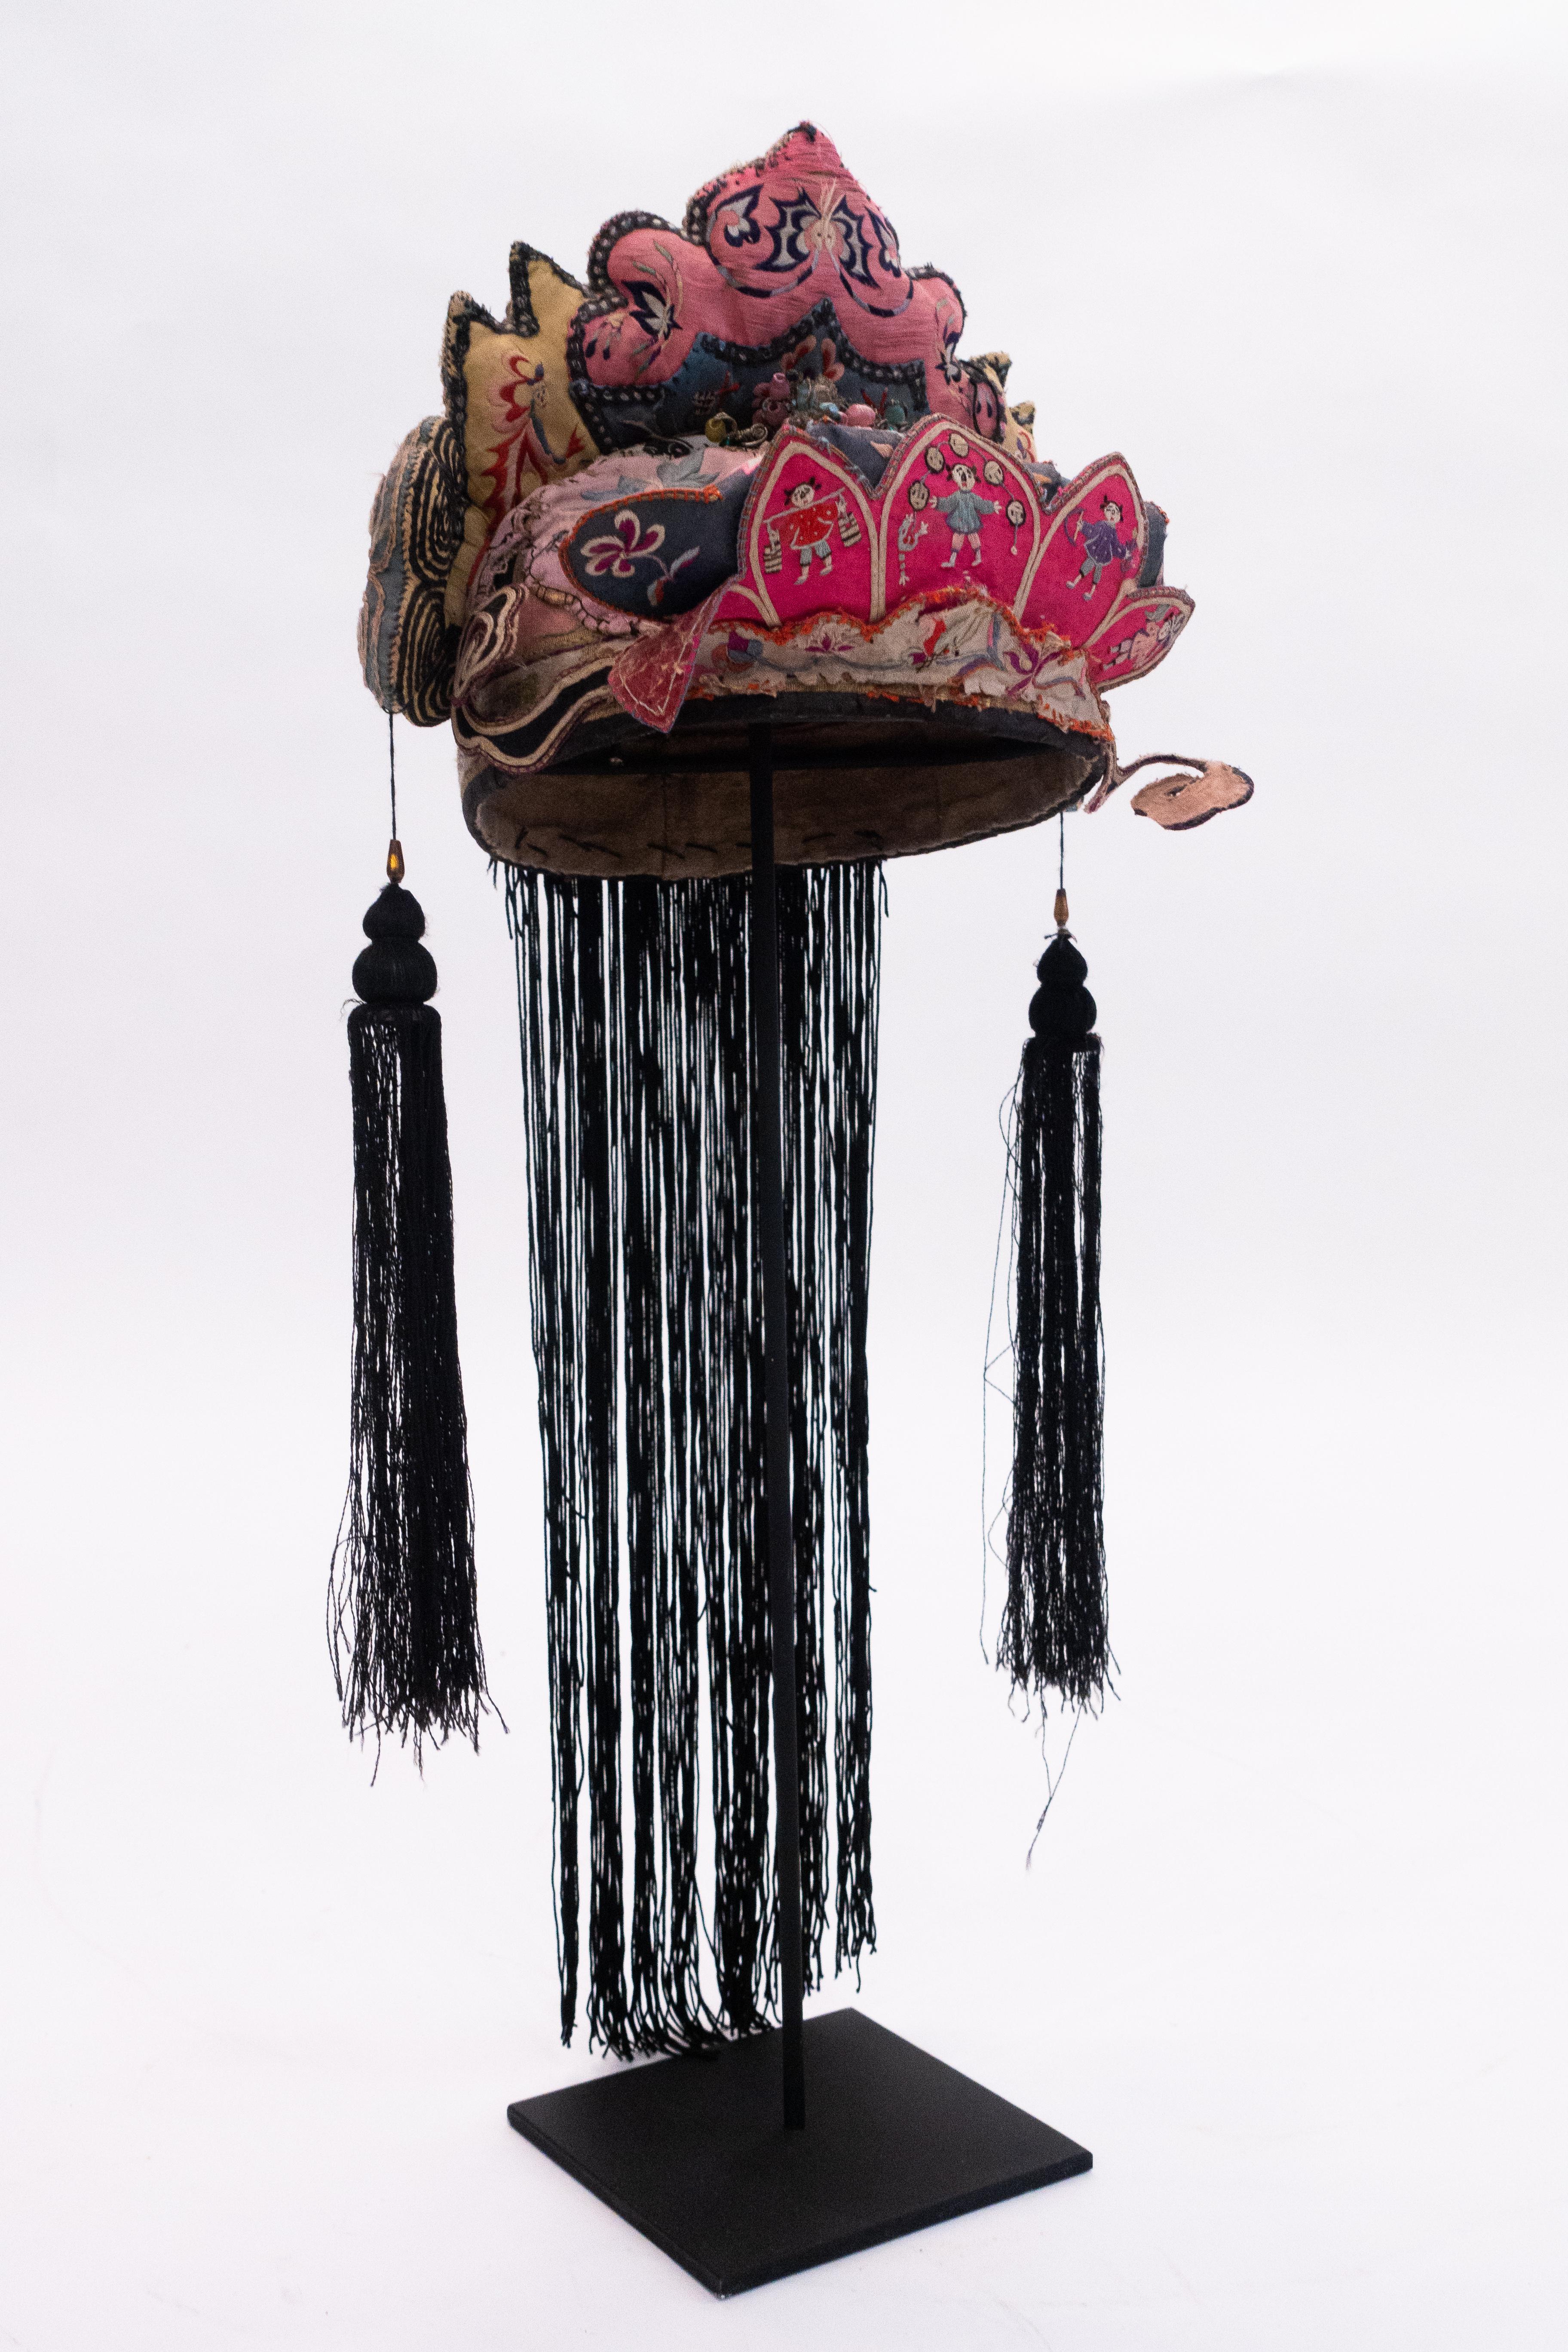 Hand embroidered silk Miao Minority tribe child's headdress with beads and tassels from the early 20th century on a custom black painted metal mount.

 